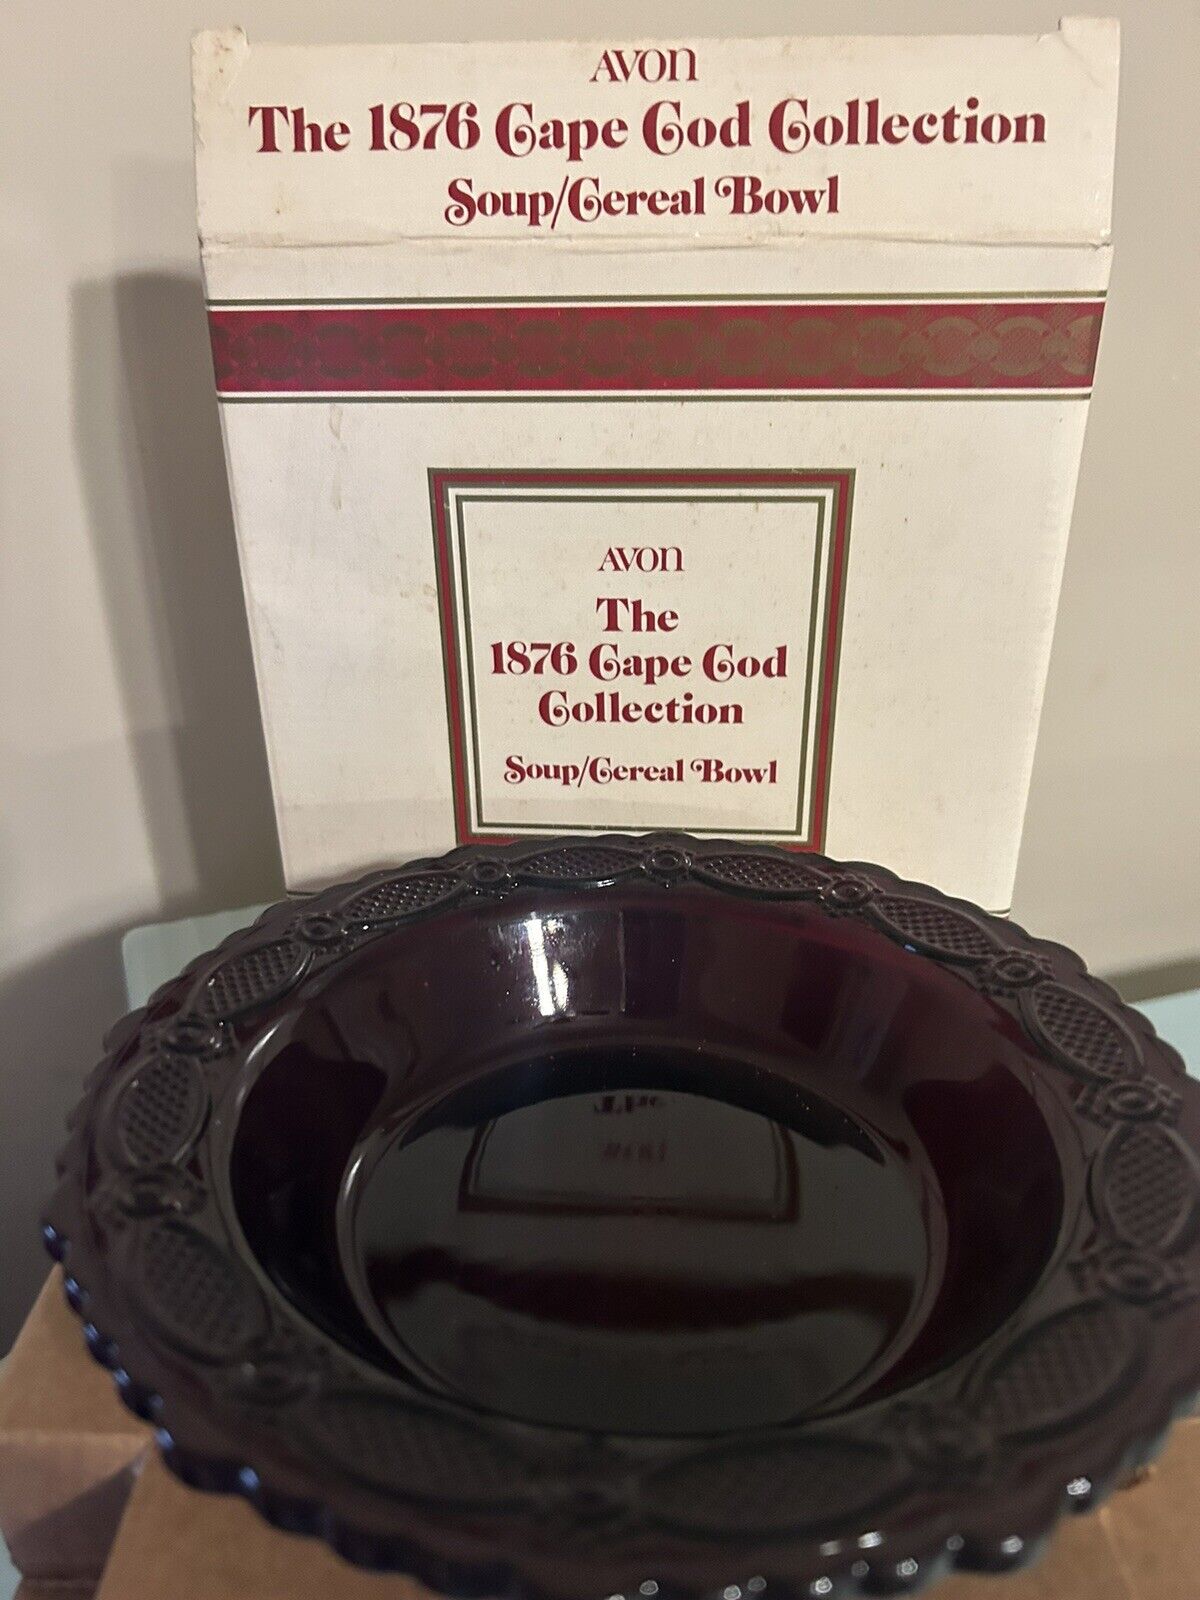  Avon 1876 Cape Cod Collection Soup Cereal Bowl Ruby Red